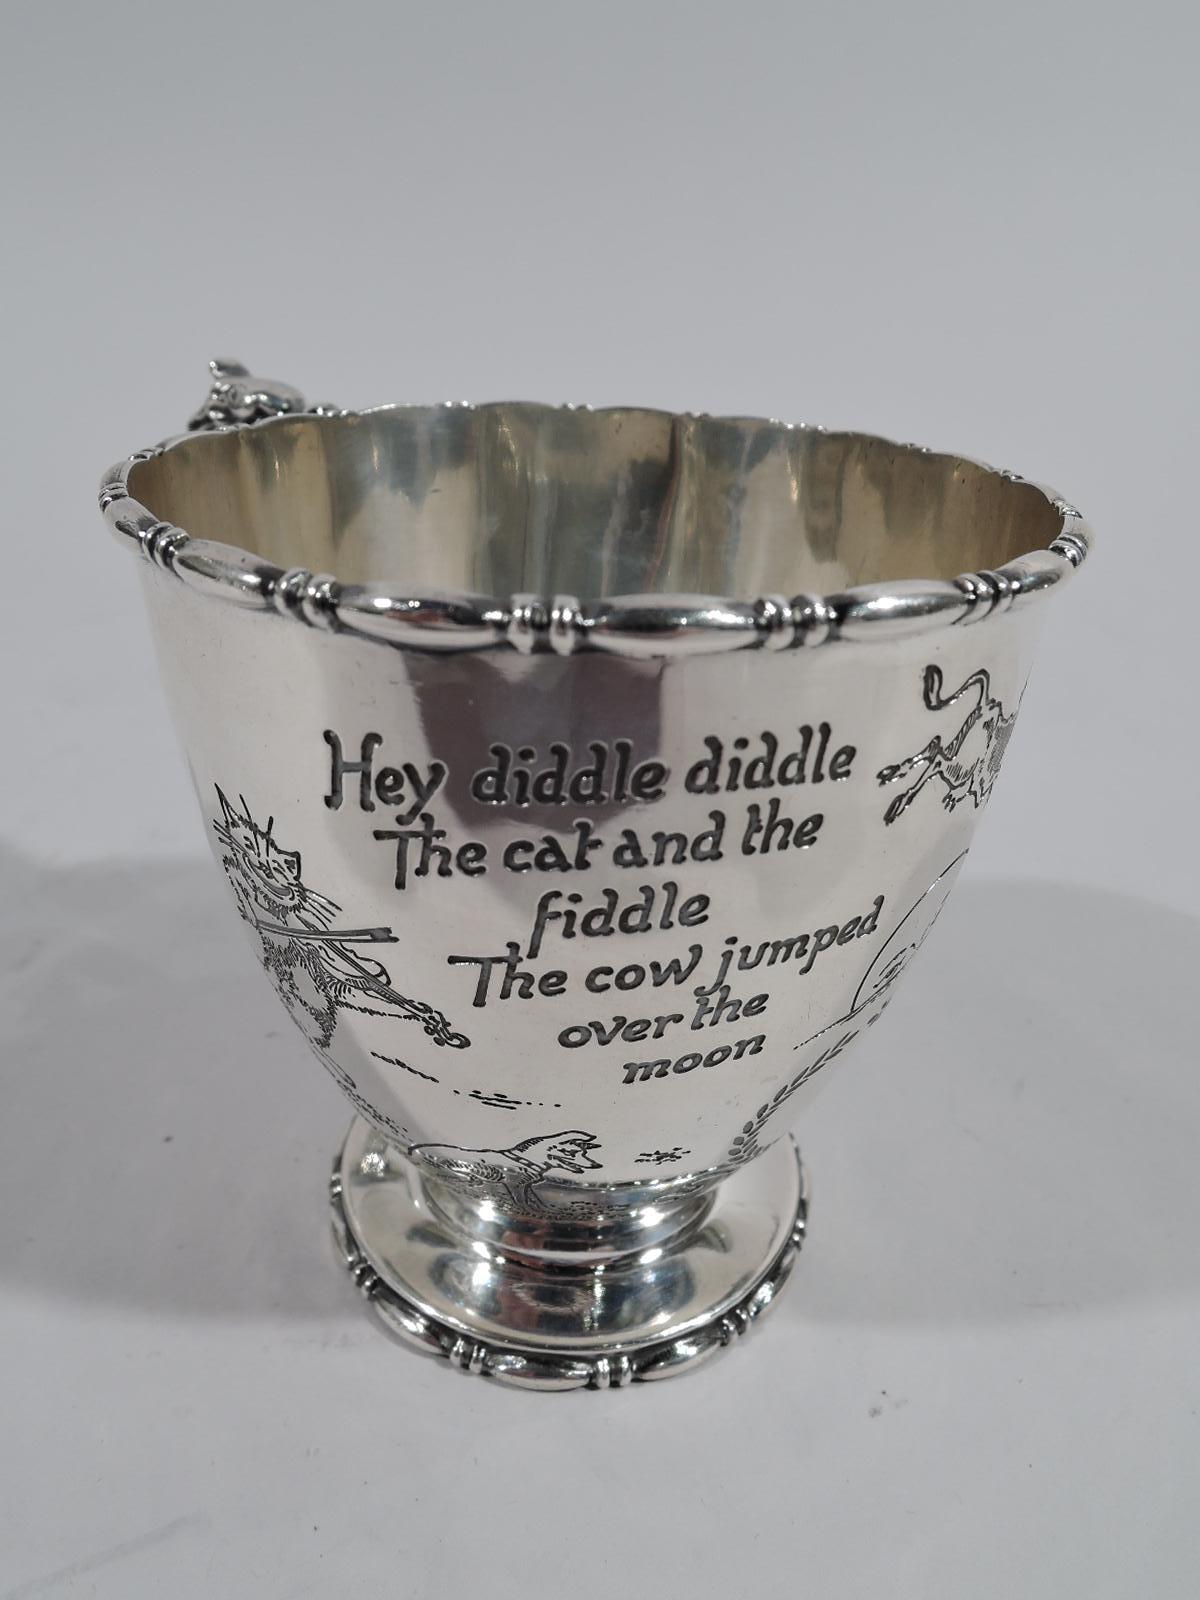 Edwardian sterling silver baby cup with nursery rhyme motif. Made by Reed & Barton in Taunton, Mass., circa 1910. Curved cone on circular foot. Scroll handle with leaf-wrapped animal head. Applied bead-and-reel rims. Engraved text and imagery for